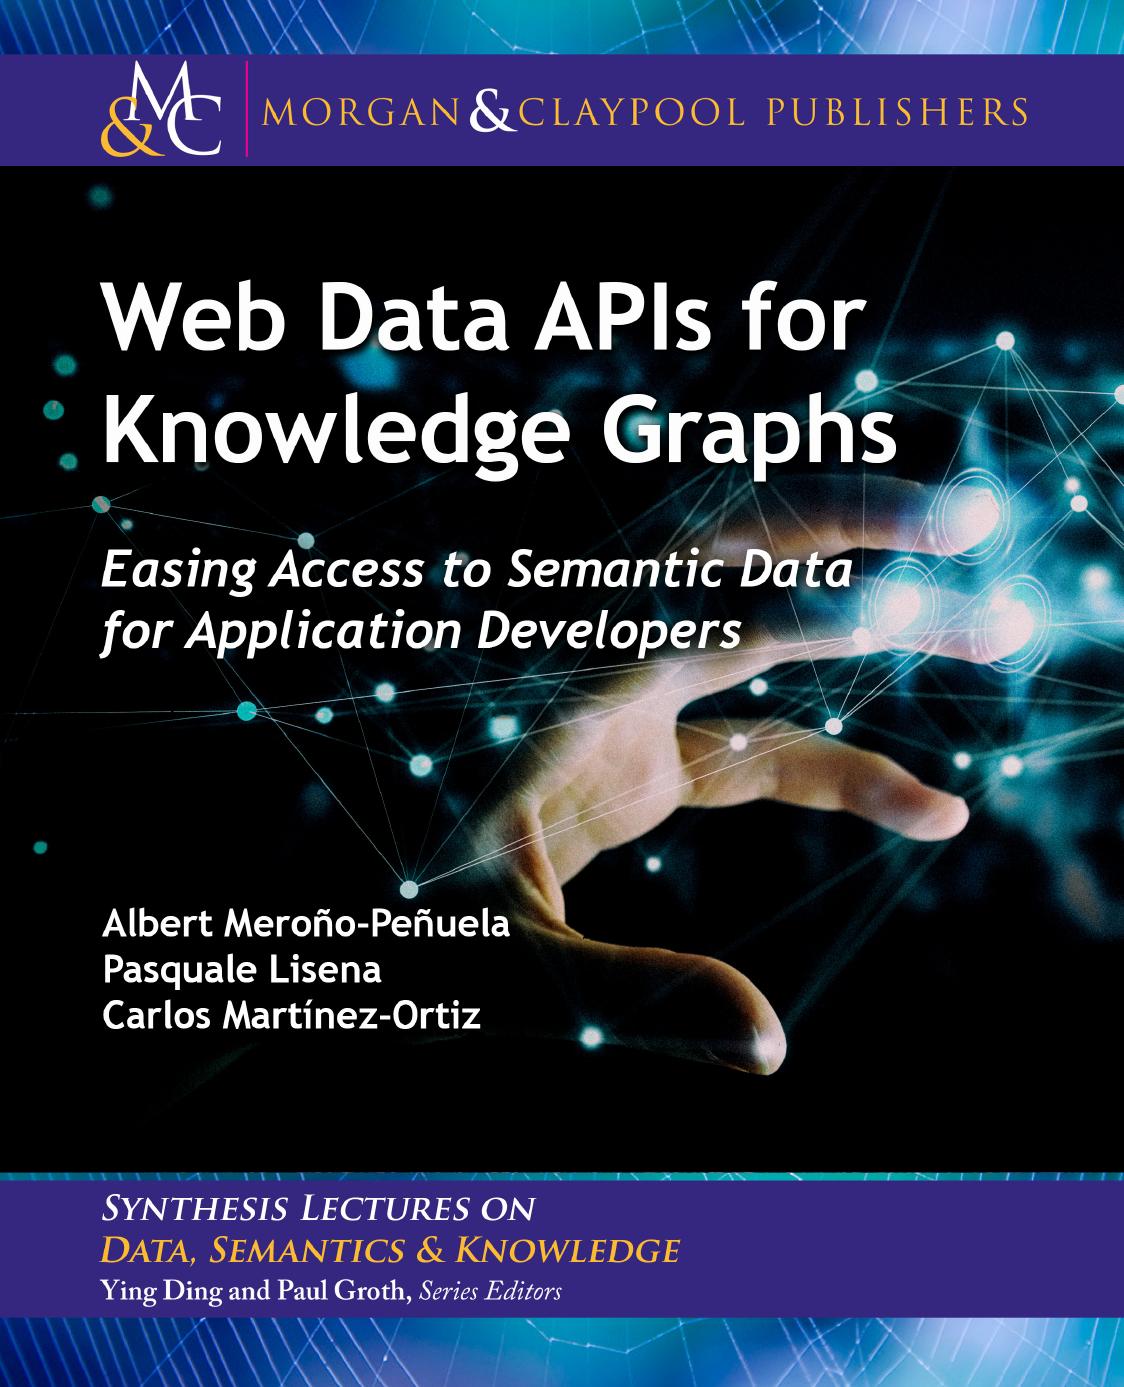 Web Data APIs for Knowledge Graphs: Easing Access to Semantic Data for Application Developers